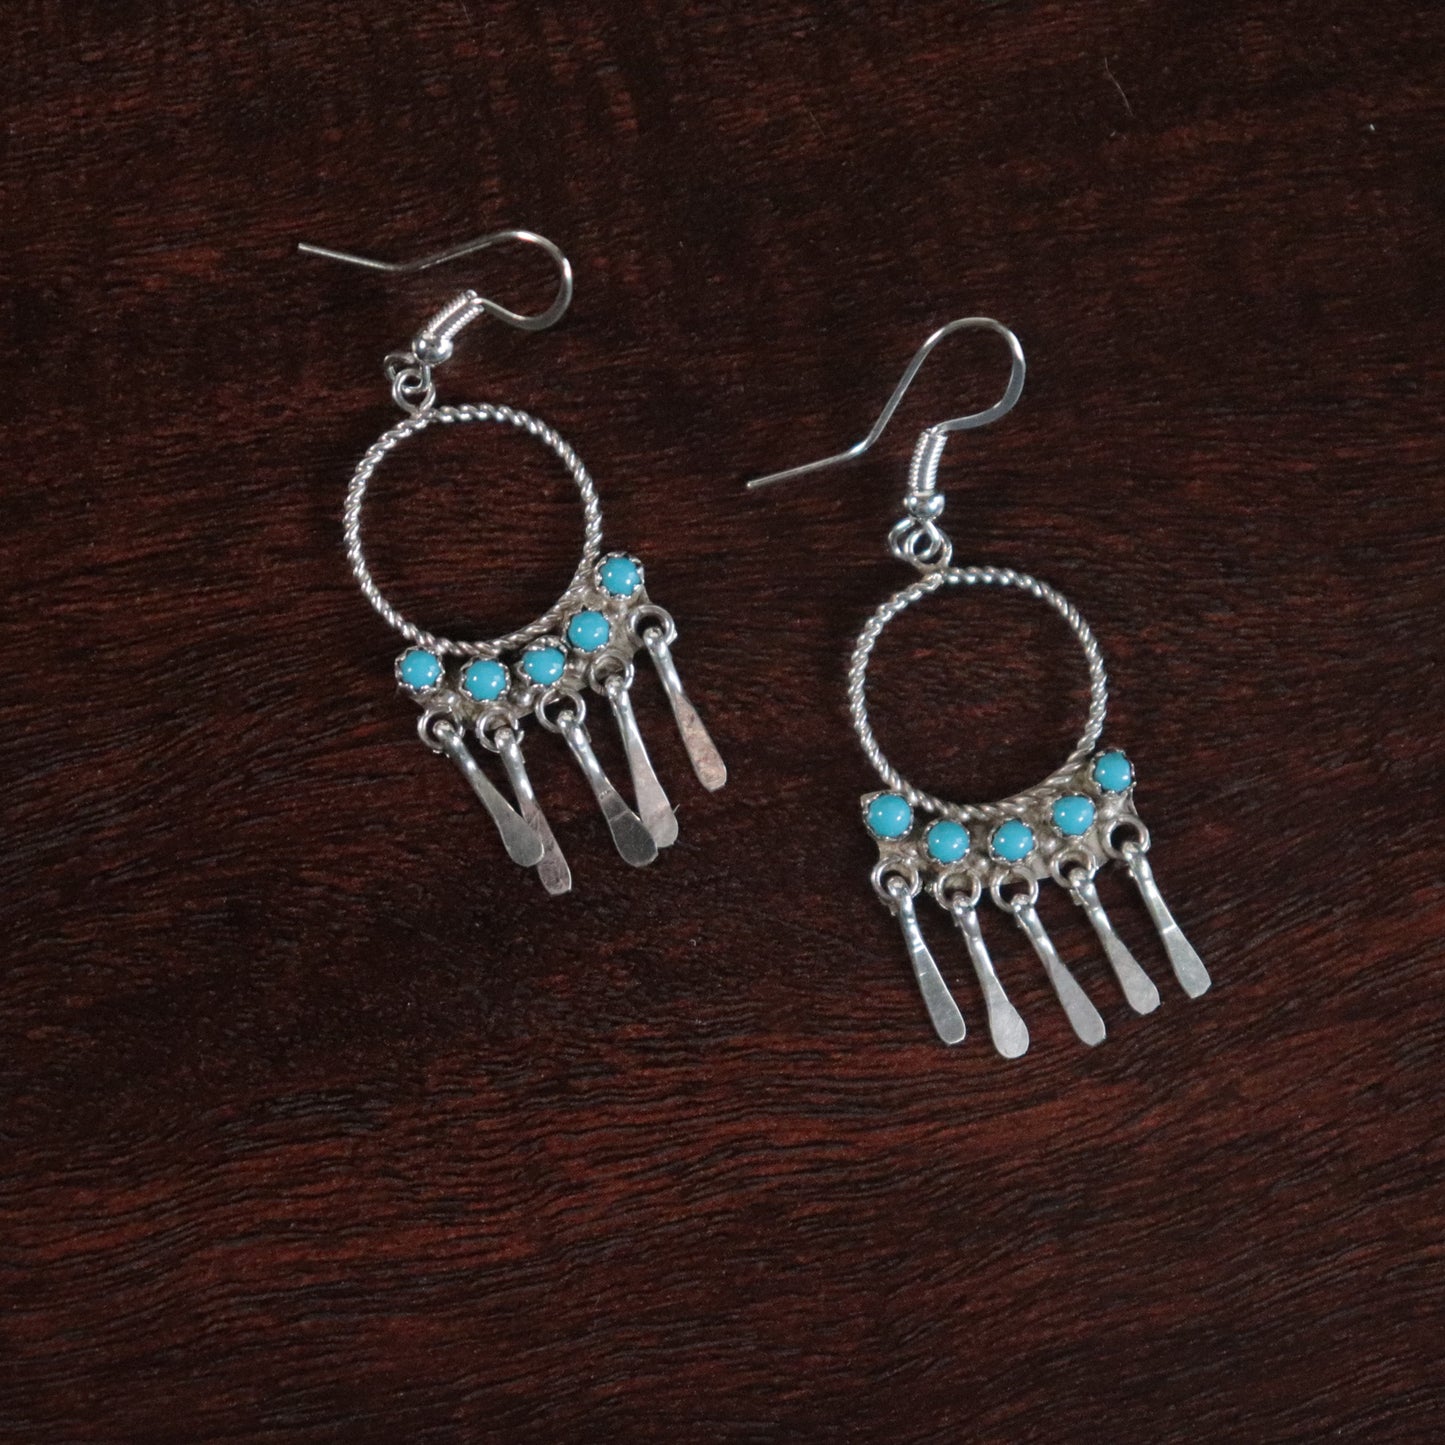 Silver Cloud and Raindrop Earrings